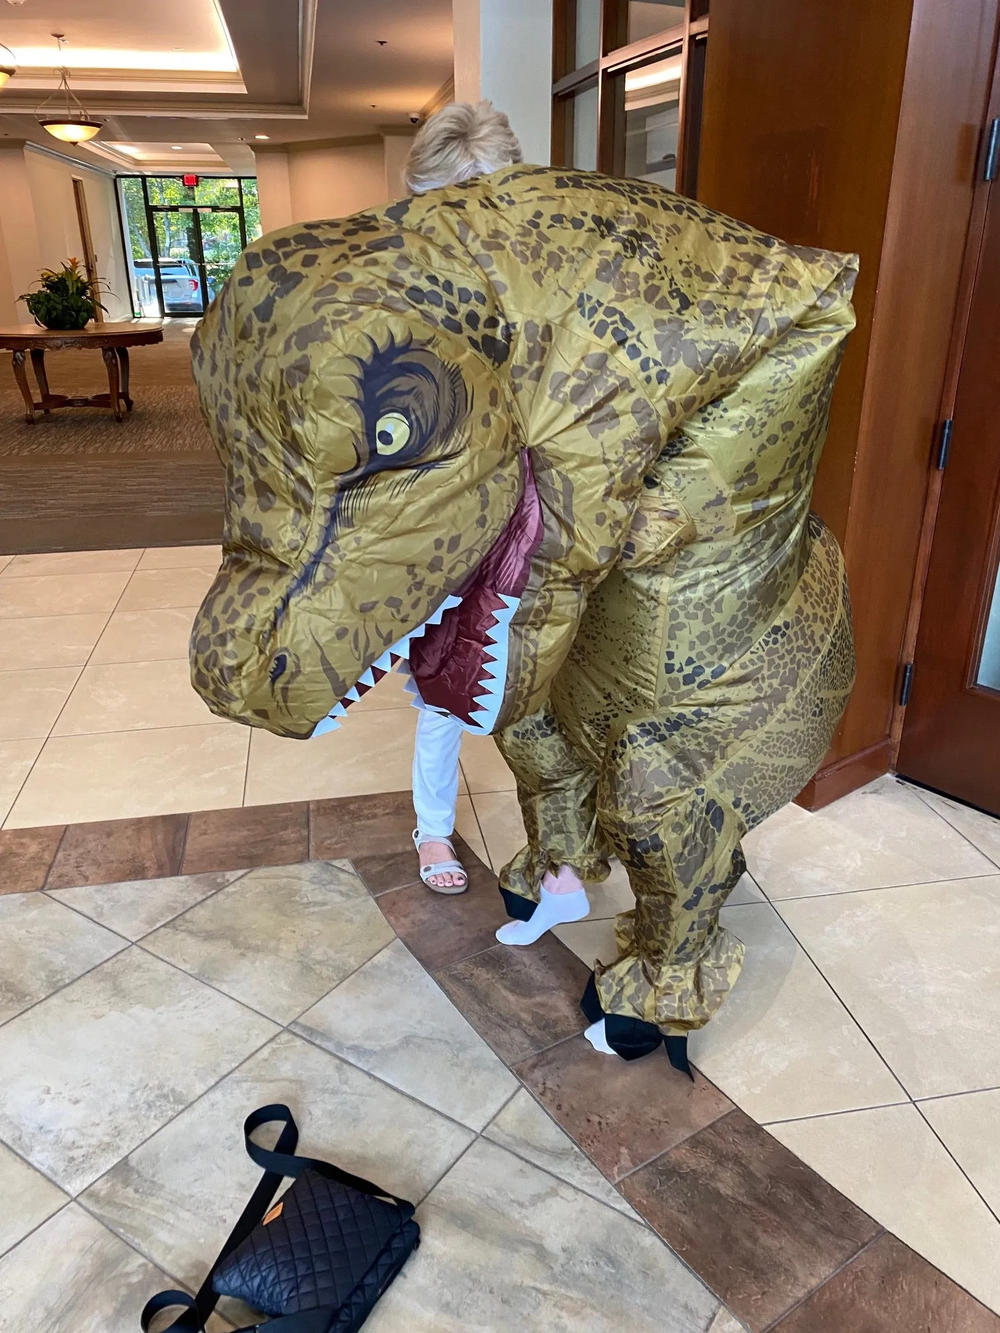 One person dressed as a dinosaur appeared at the council meeting in silent protest of the city’s ordinance.